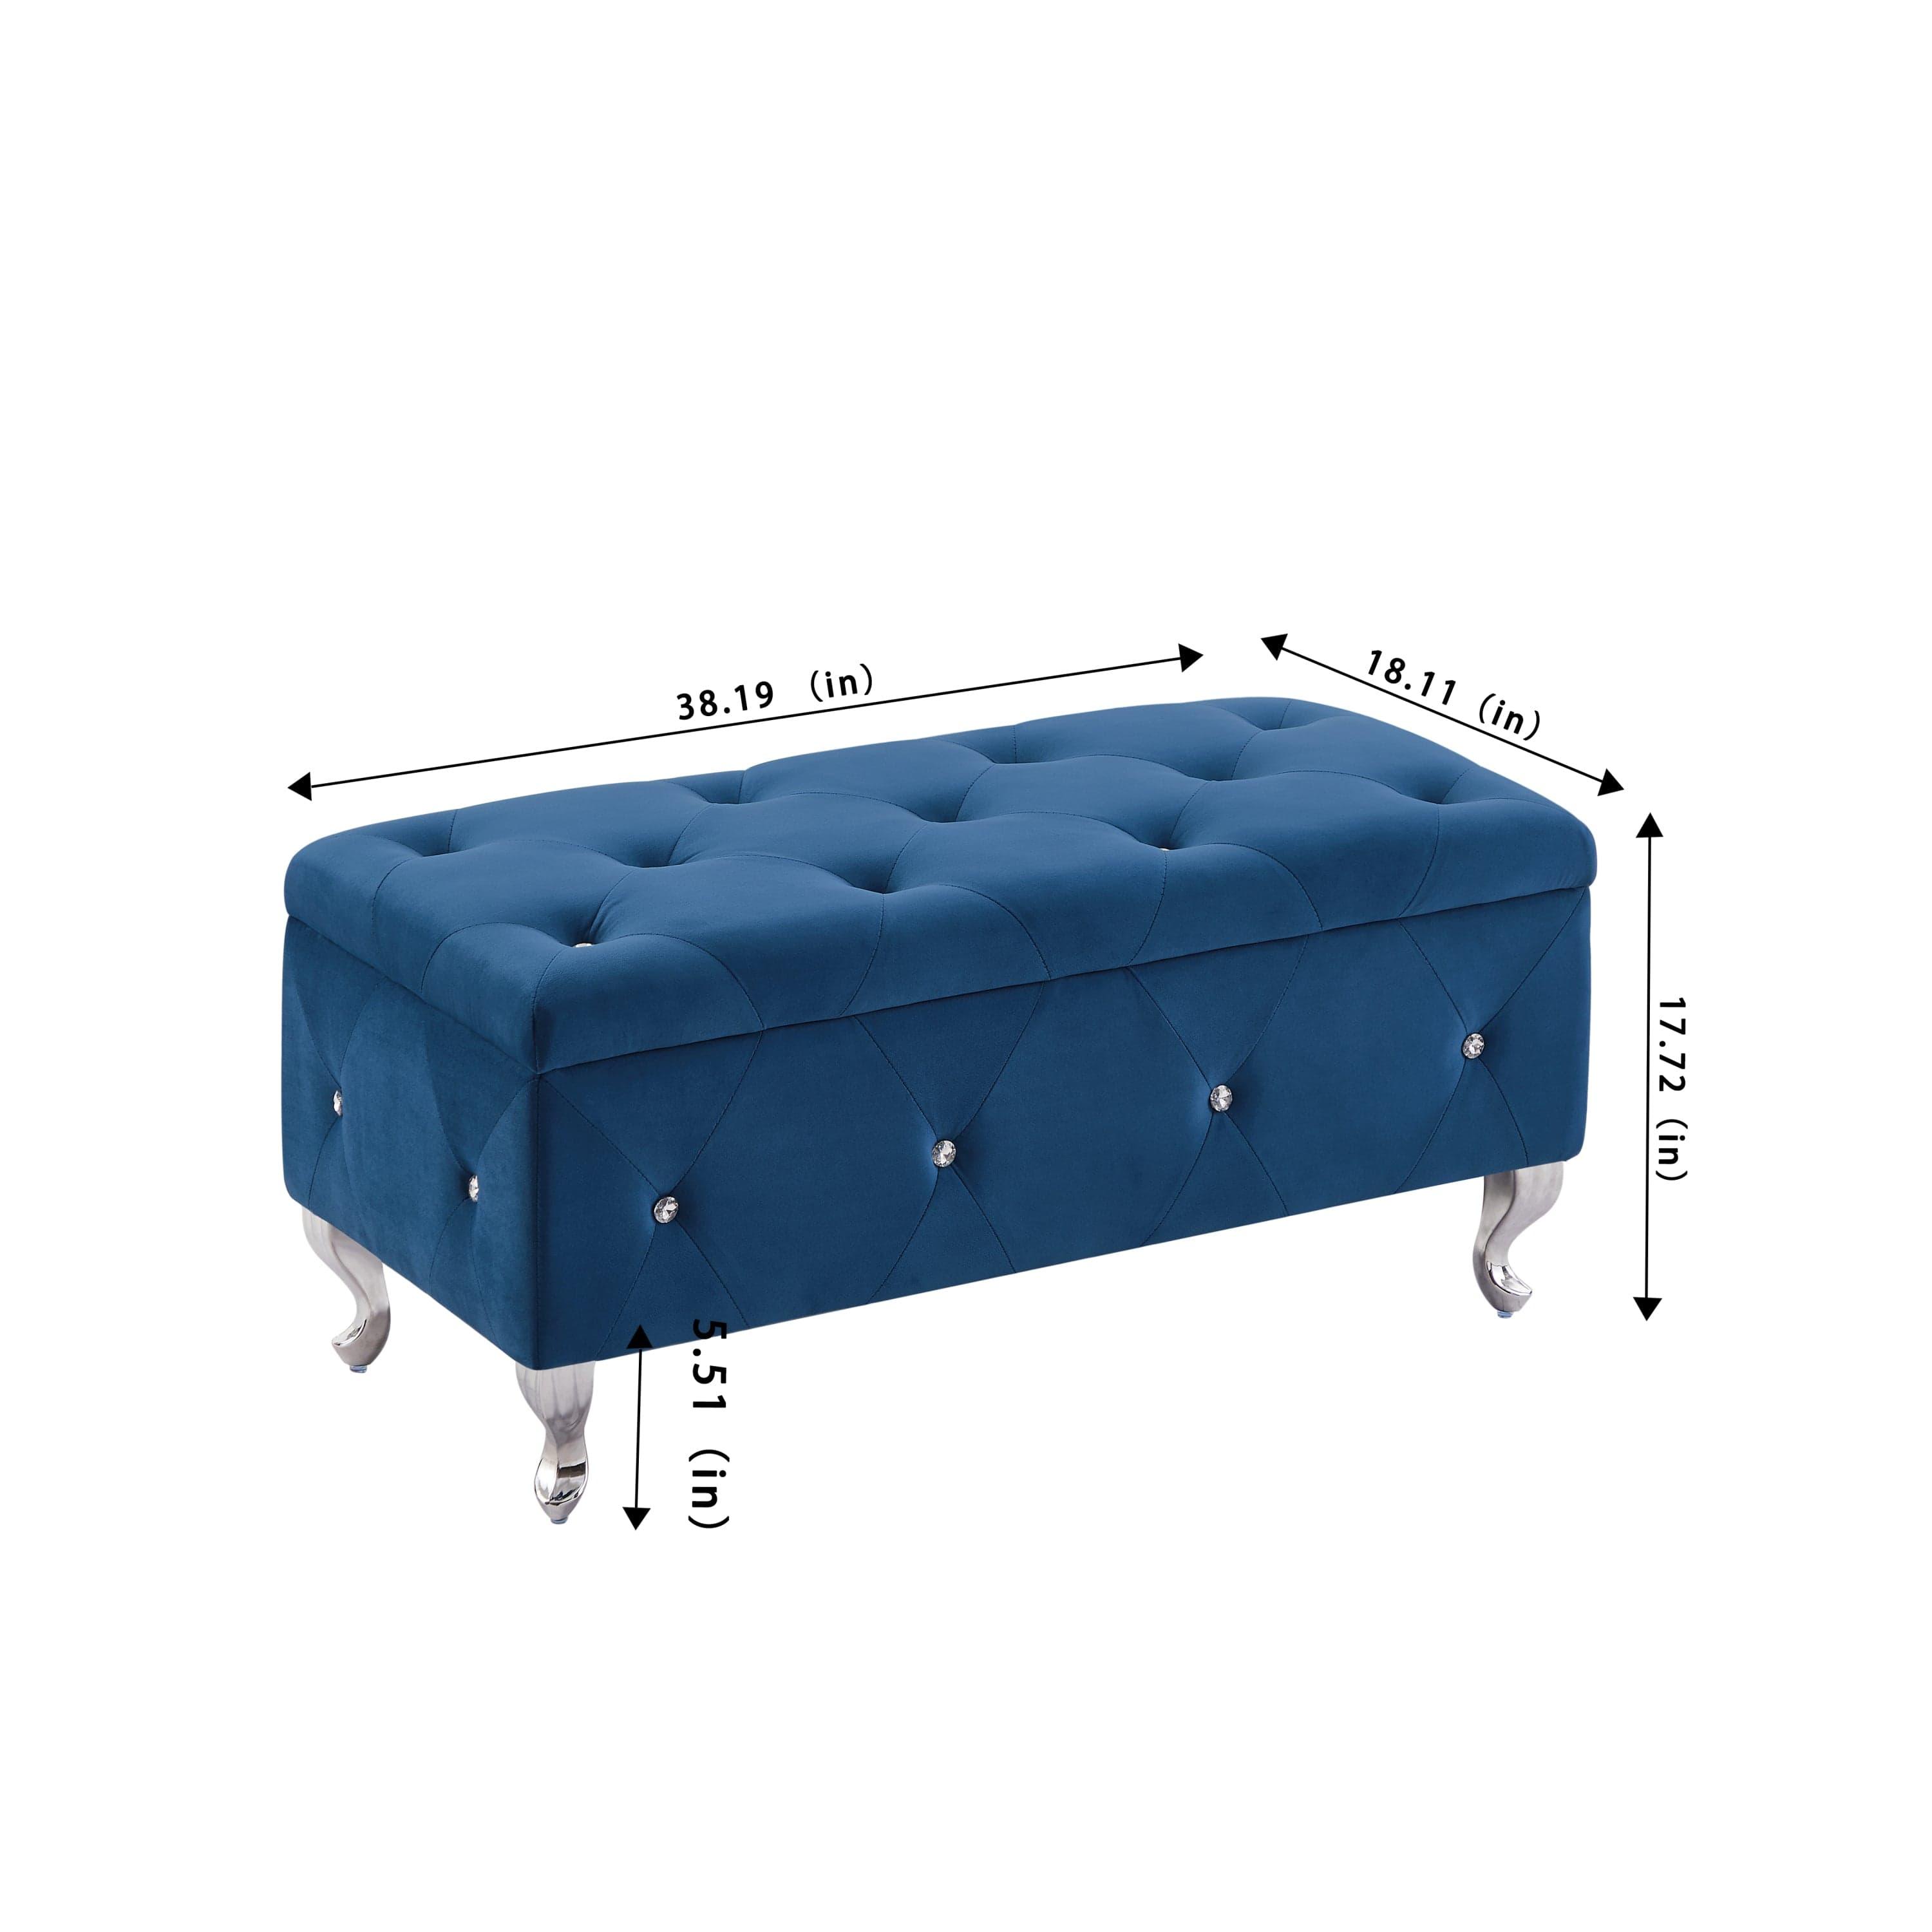 Shop Storage Bench, Flip Top Entryway Bench Seat with Safety Hinge, Storage Chest with Padded Seat, Bed End Stool for Hallway Living Room Bedroom, Supports 250 lb,Blue Velet Mademoiselle Home Decor